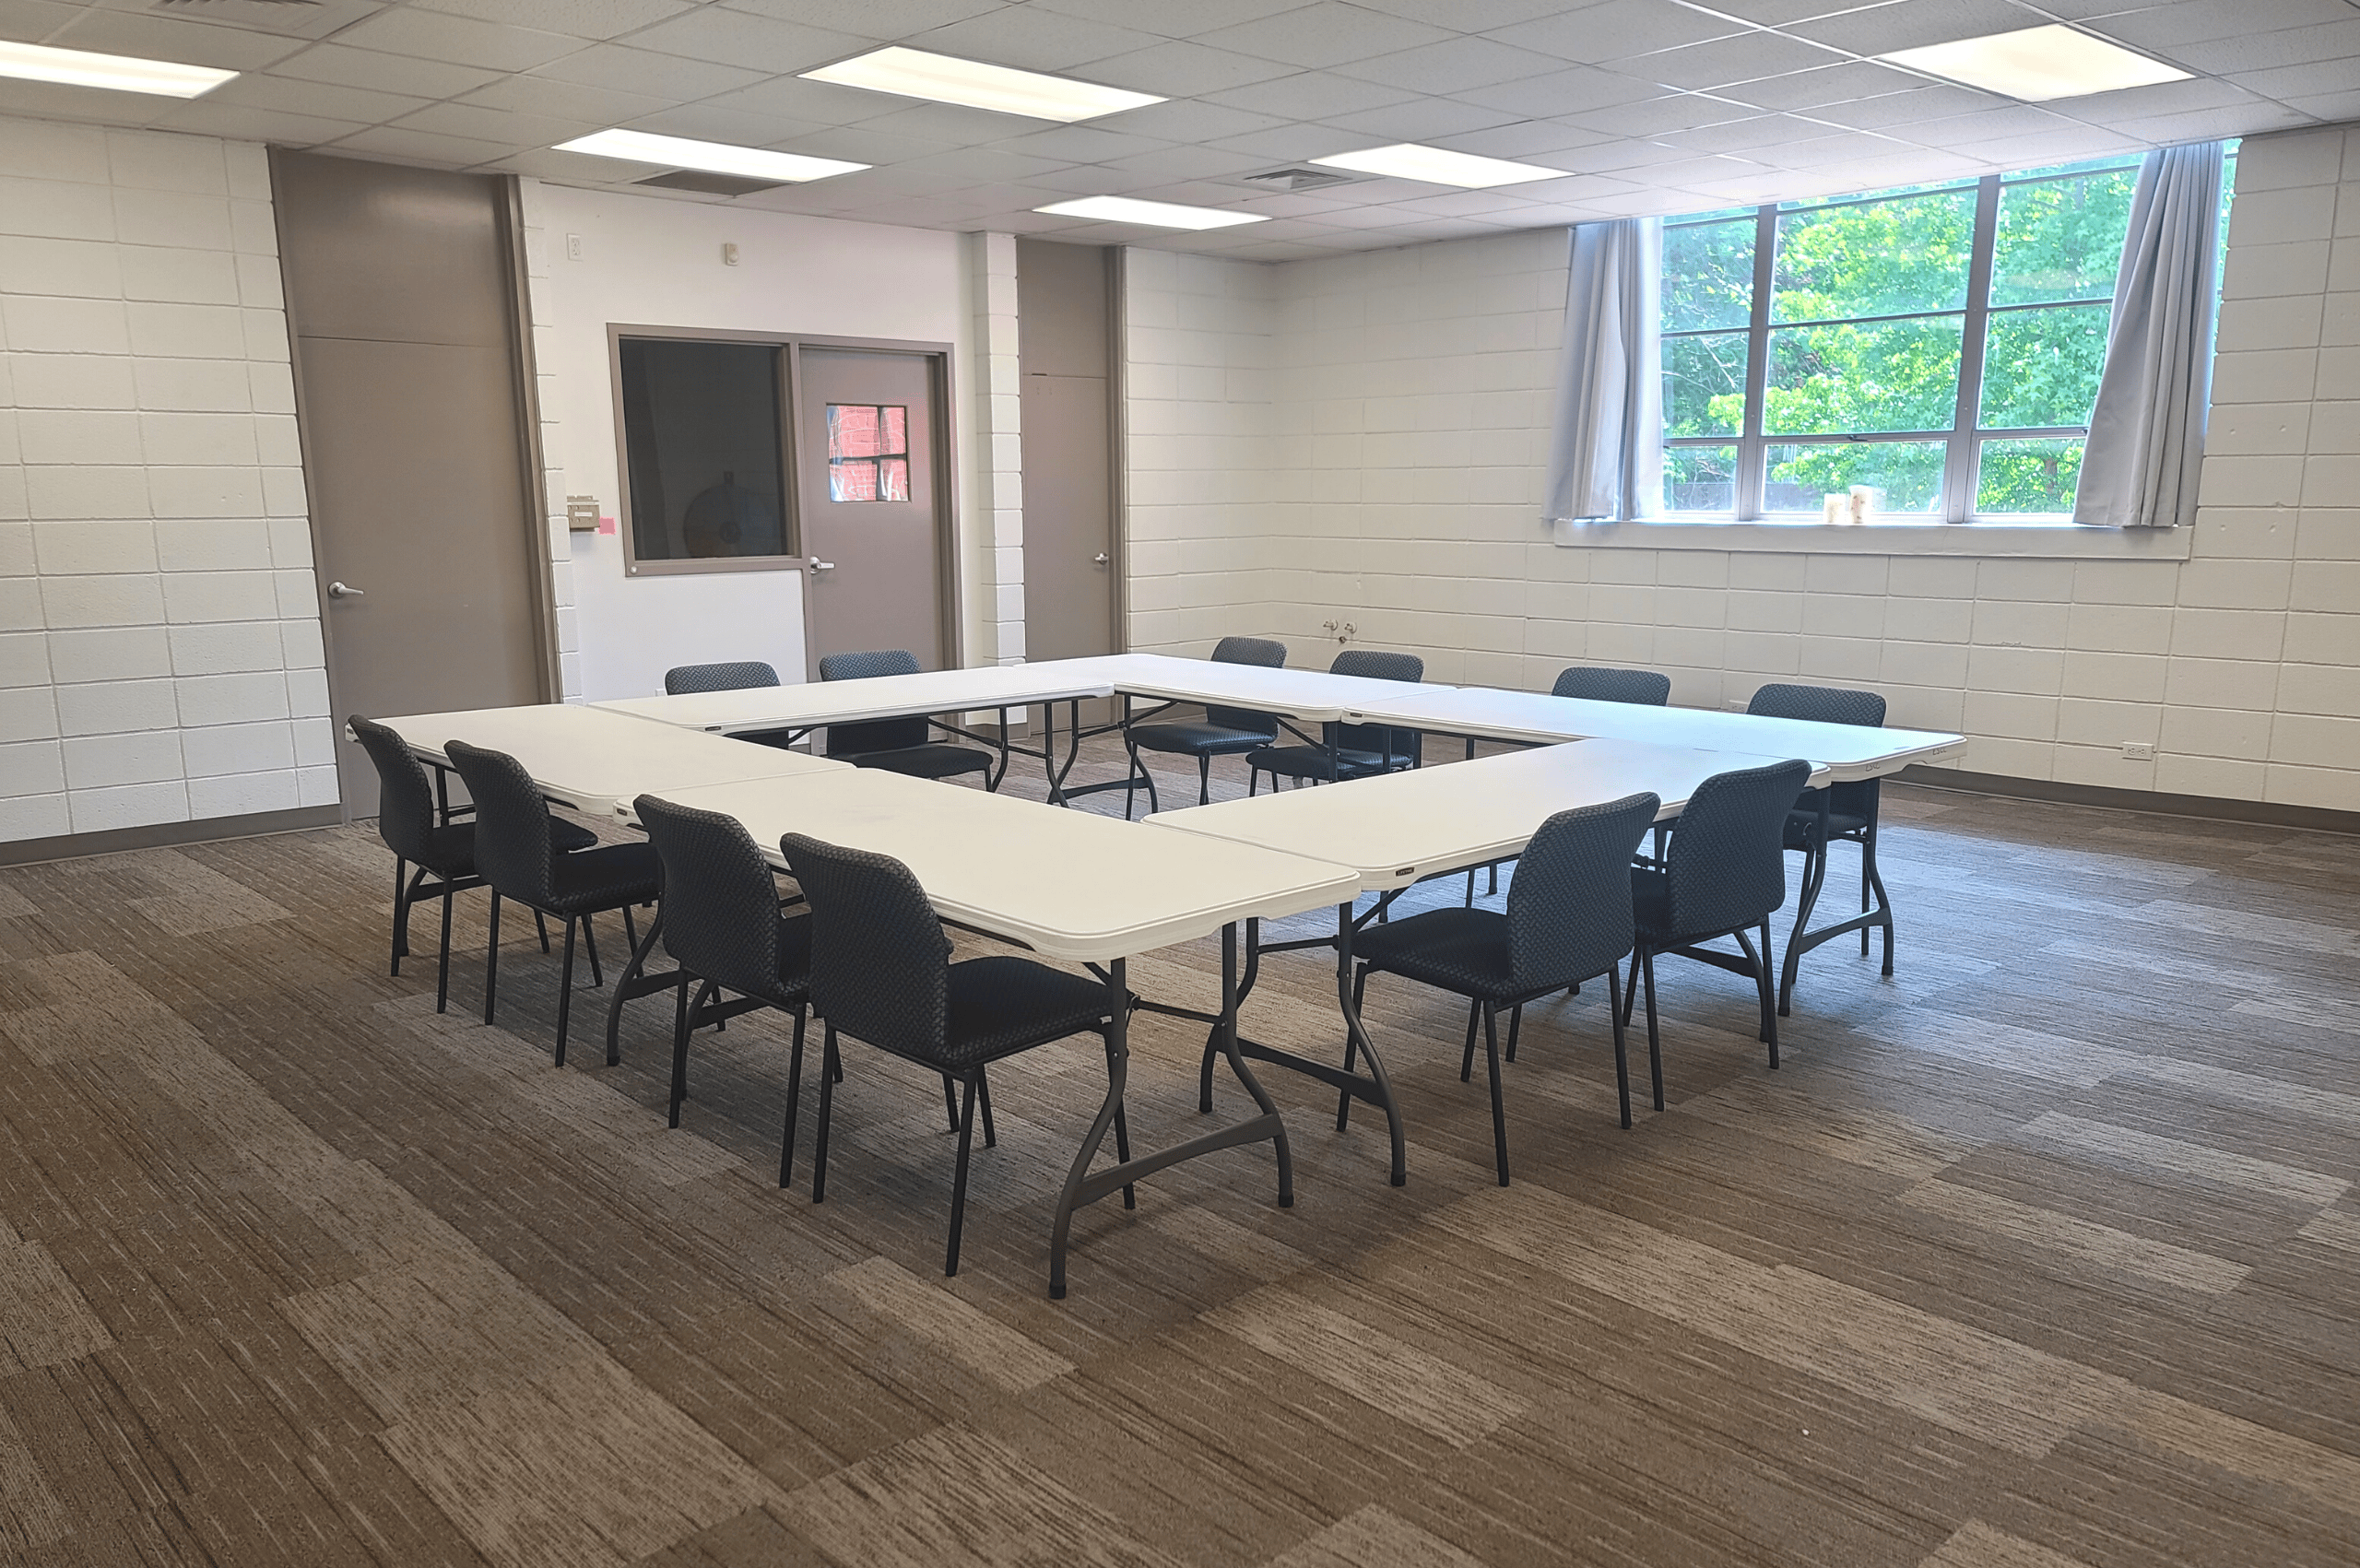 photo of table and chairs set up for a meeting